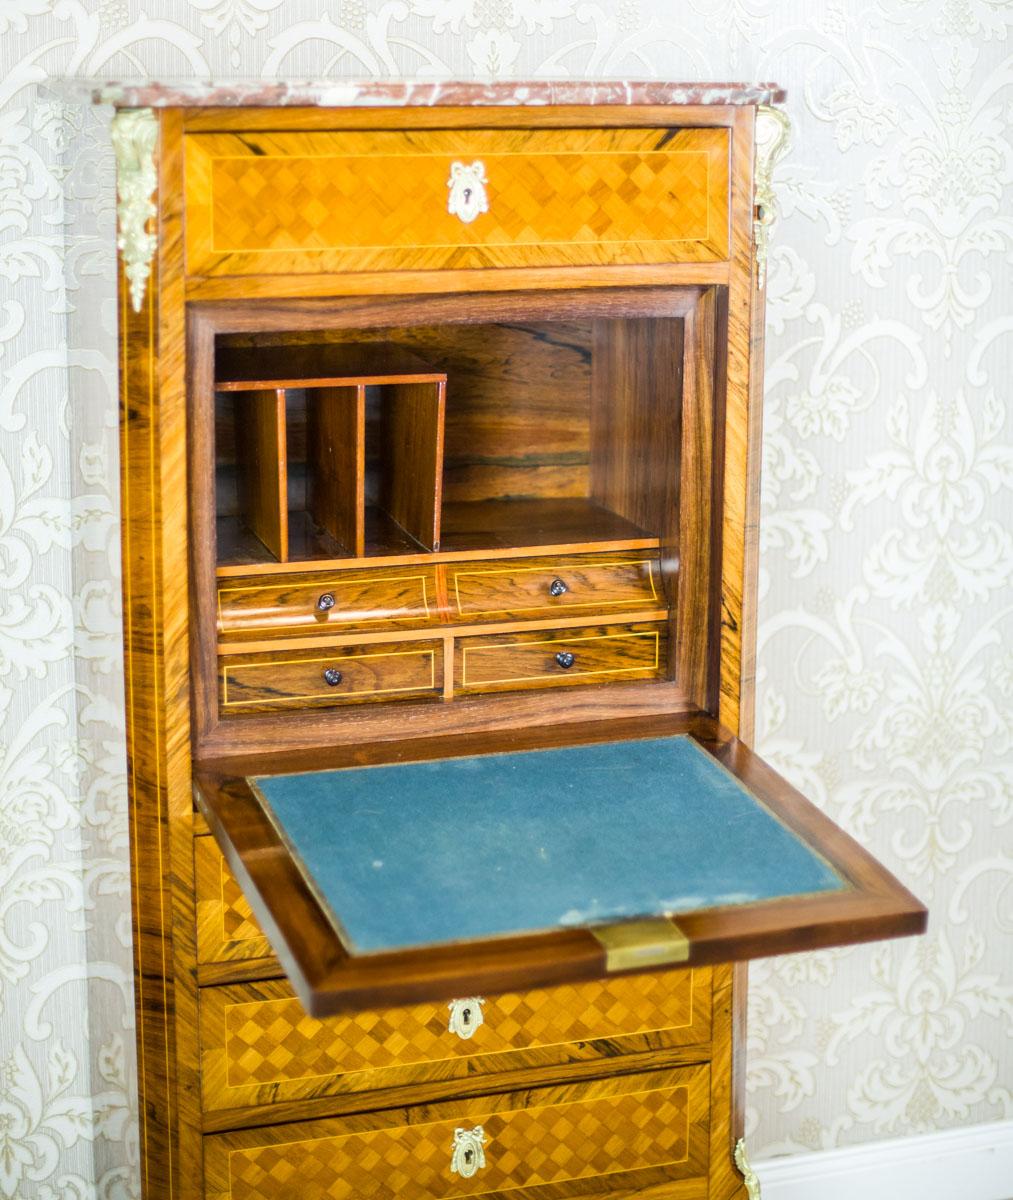 We present you this neat secretary desk, dated the late 19th century, in the form a post that resembles the Louis XV furniture.
The body is placed on bent legs with three drawers at the bottom; with a removable board flush with the rest of the item,